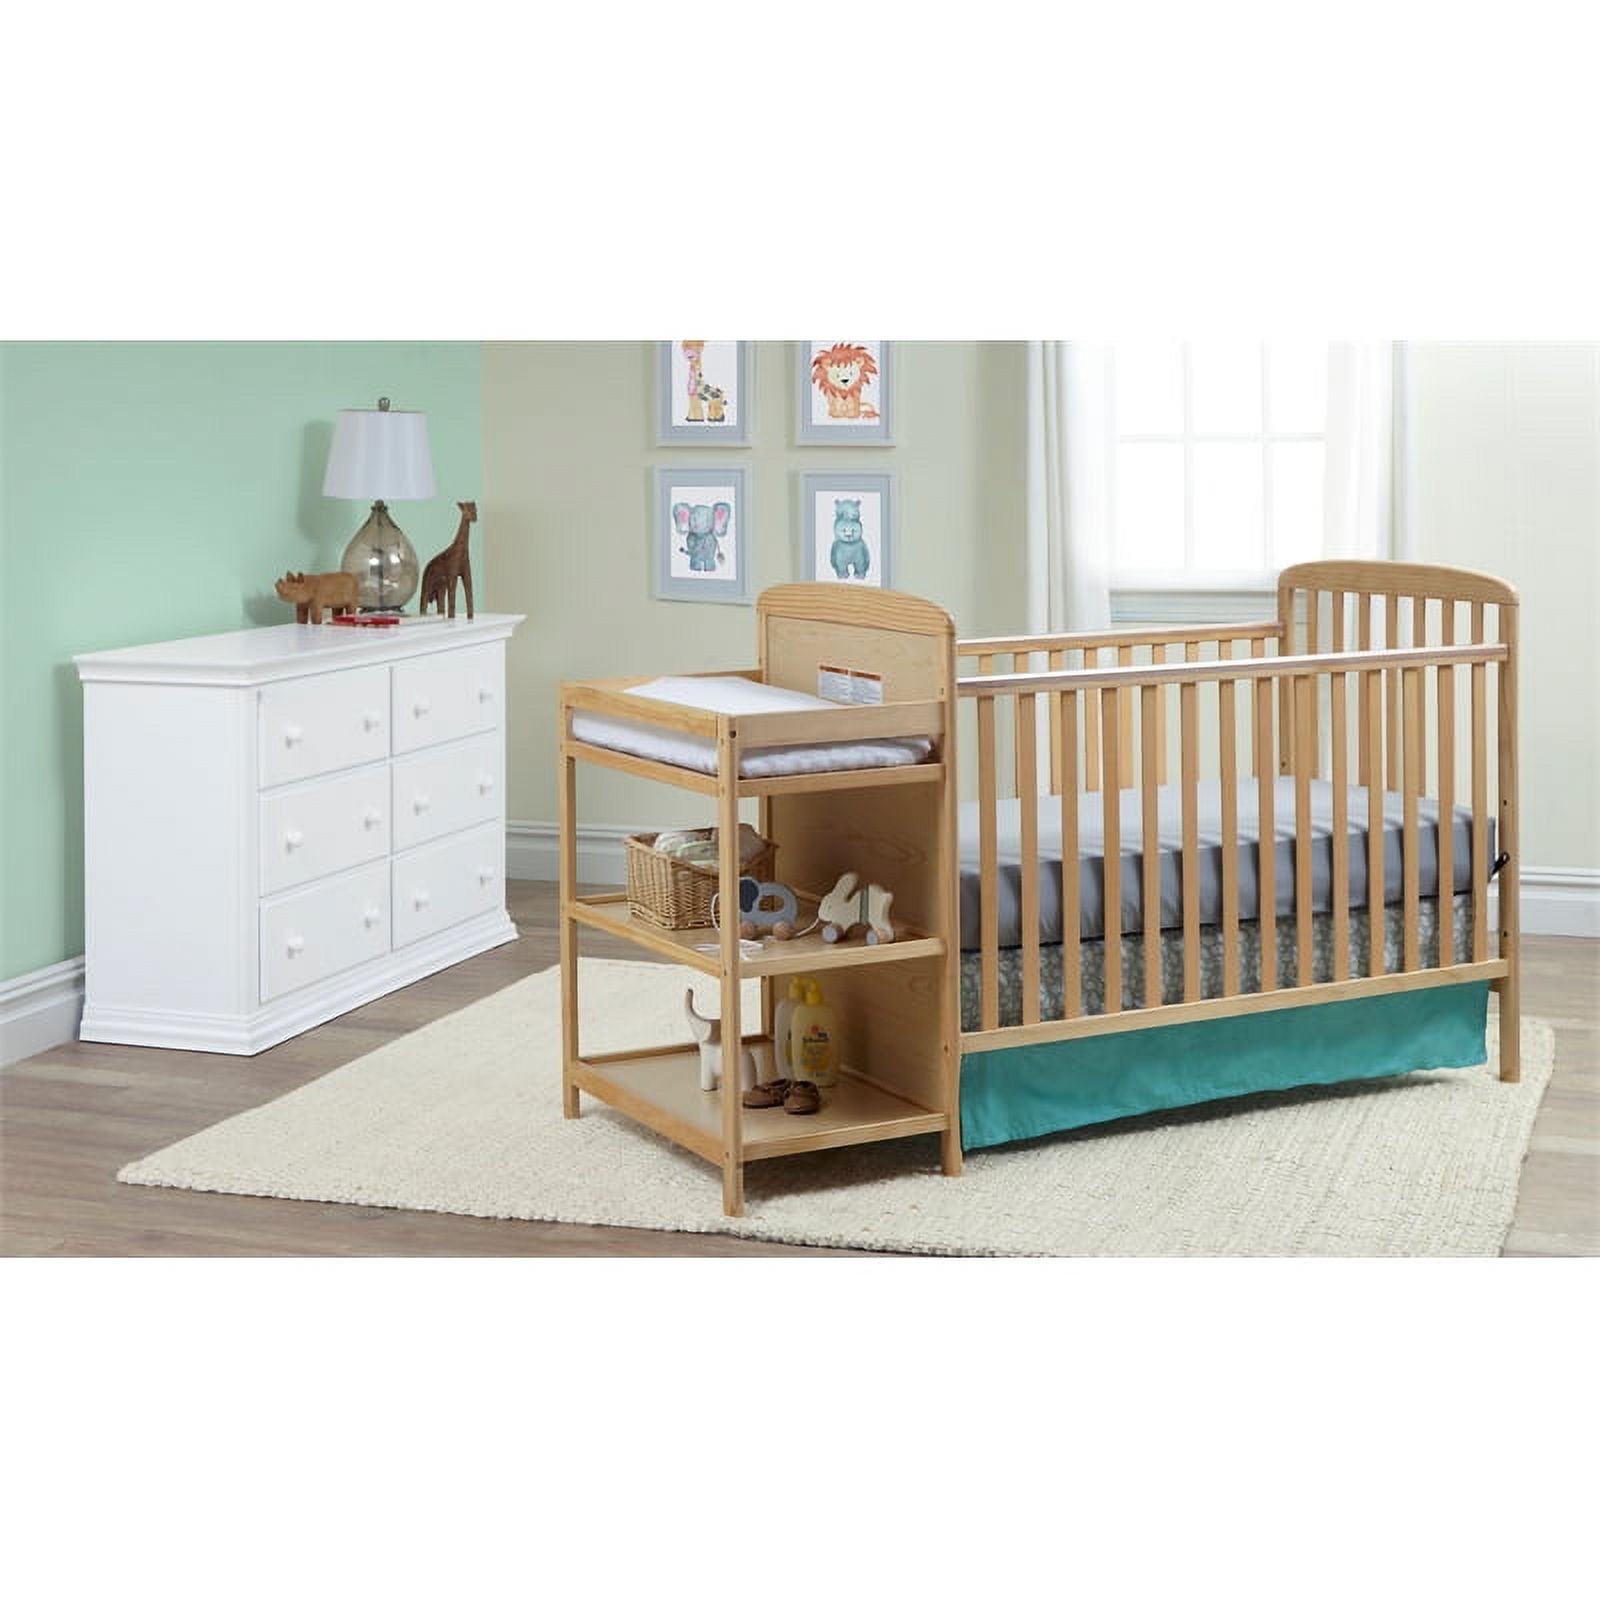 Suite Bebe  Ramsey Crib & Changer Combo, Natural - image 5 of 5